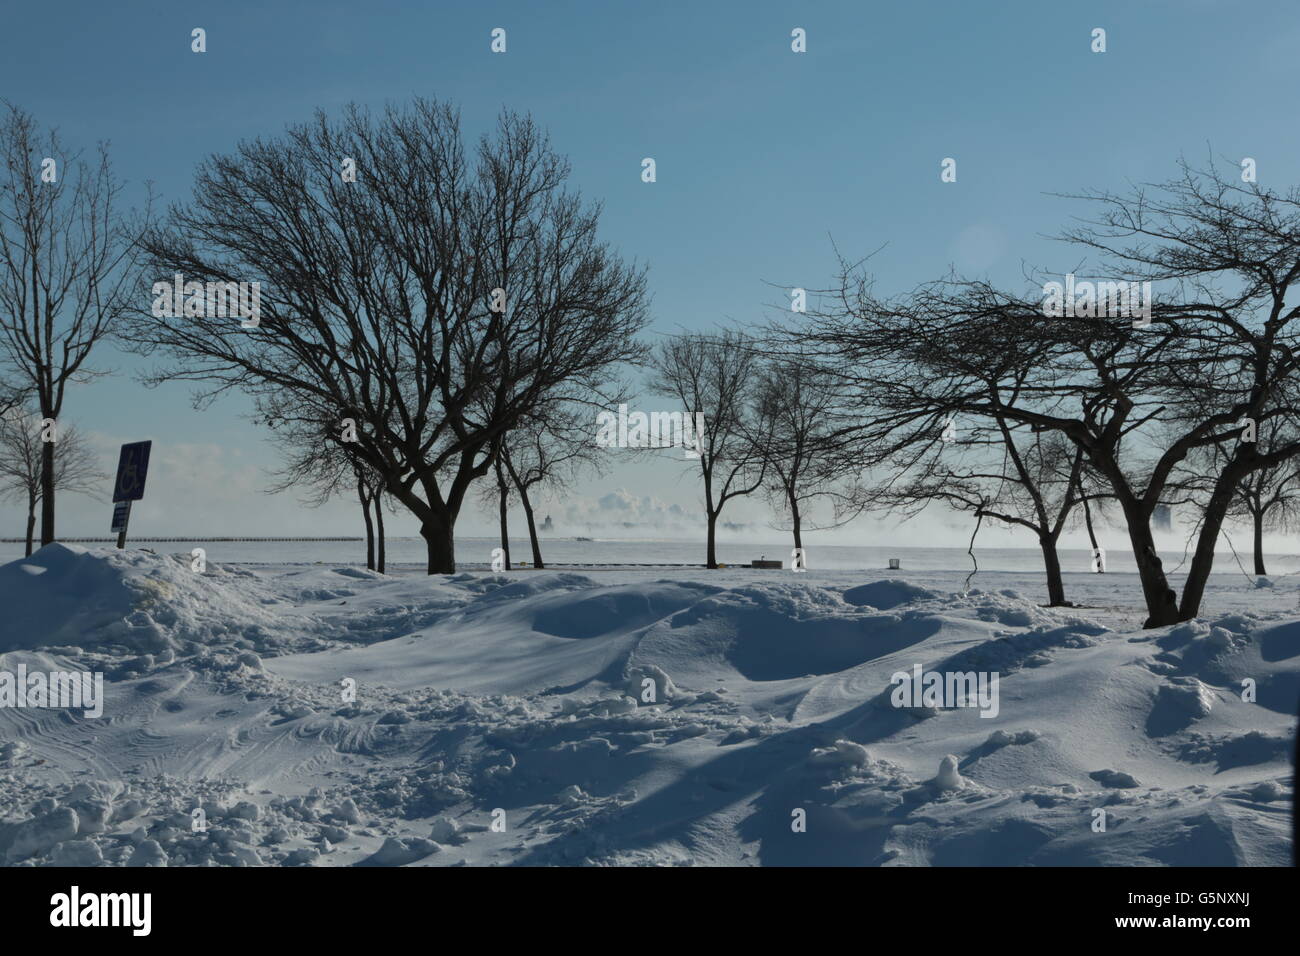 Snow covers the ground of a park by Lake Michigan in Milwaukee, Wisconsin in 2014 winter. Stock Photo